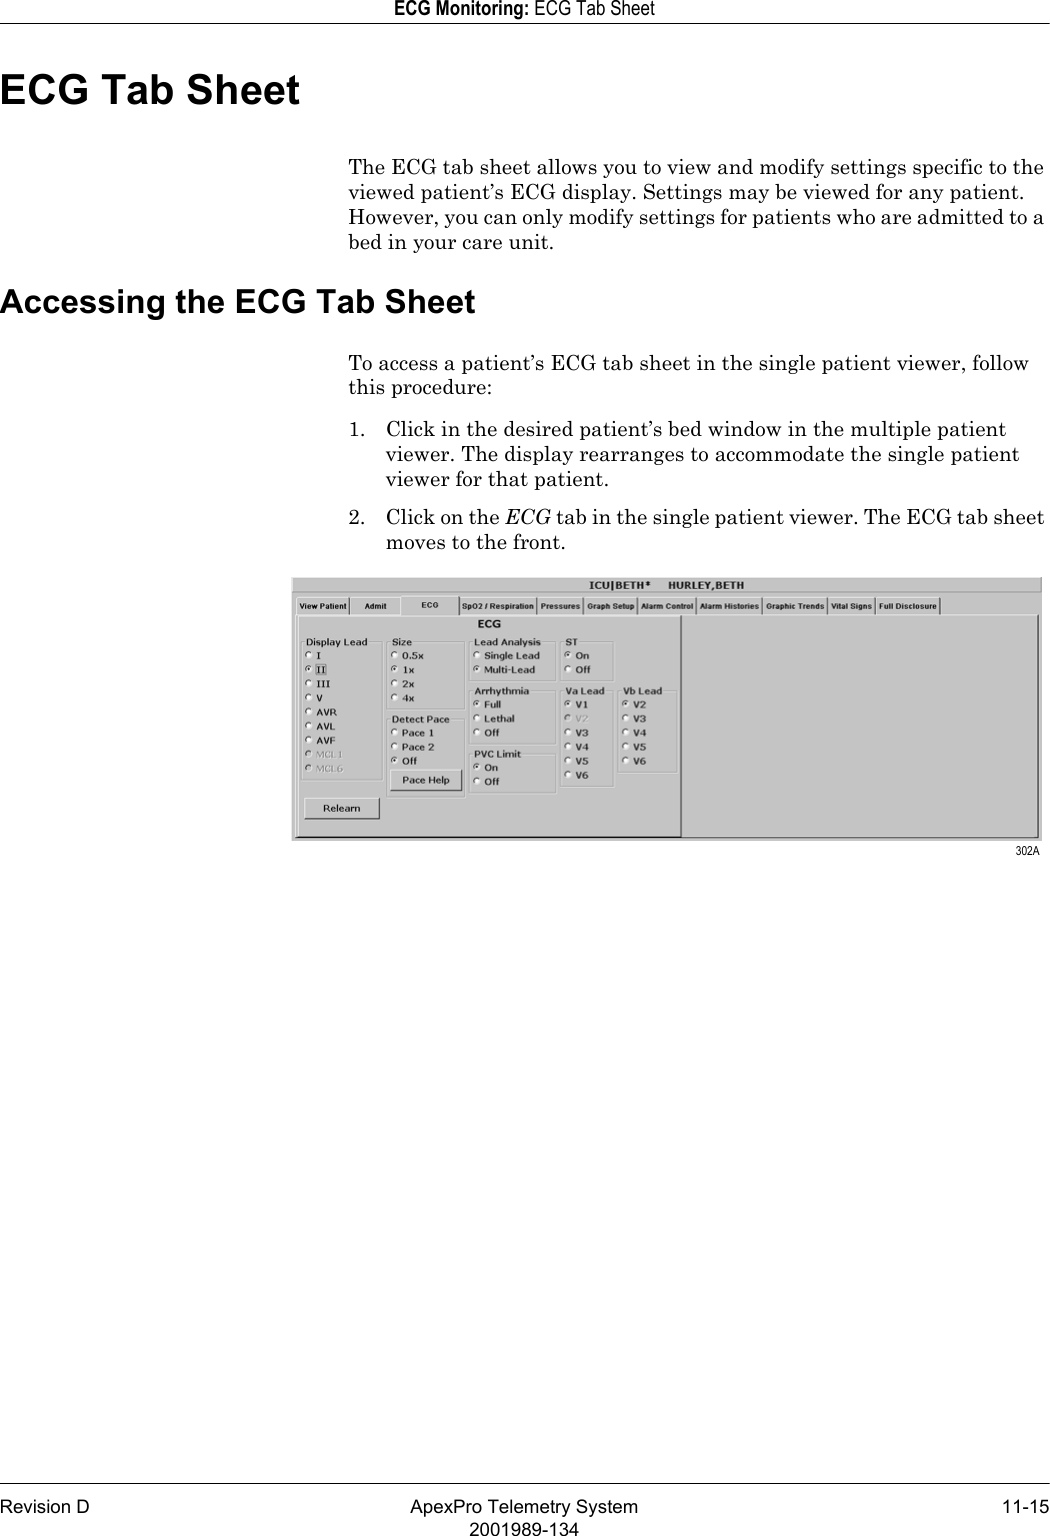 Revision D ApexPro Telemetry System 11-152001989-134ECG Monitoring: ECG Tab SheetECG Tab SheetThe ECG tab sheet allows you to view and modify settings specific to the viewed patient’s ECG display. Settings may be viewed for any patient. However, you can only modify settings for patients who are admitted to a bed in your care unit.Accessing the ECG Tab SheetTo access a patient’s ECG tab sheet in the single patient viewer, follow this procedure:1. Click in the desired patient’s bed window in the multiple patient viewer. The display rearranges to accommodate the single patient viewer for that patient.2. Click on the ECG tab in the single patient viewer. The ECG tab sheet moves to the front. 302A